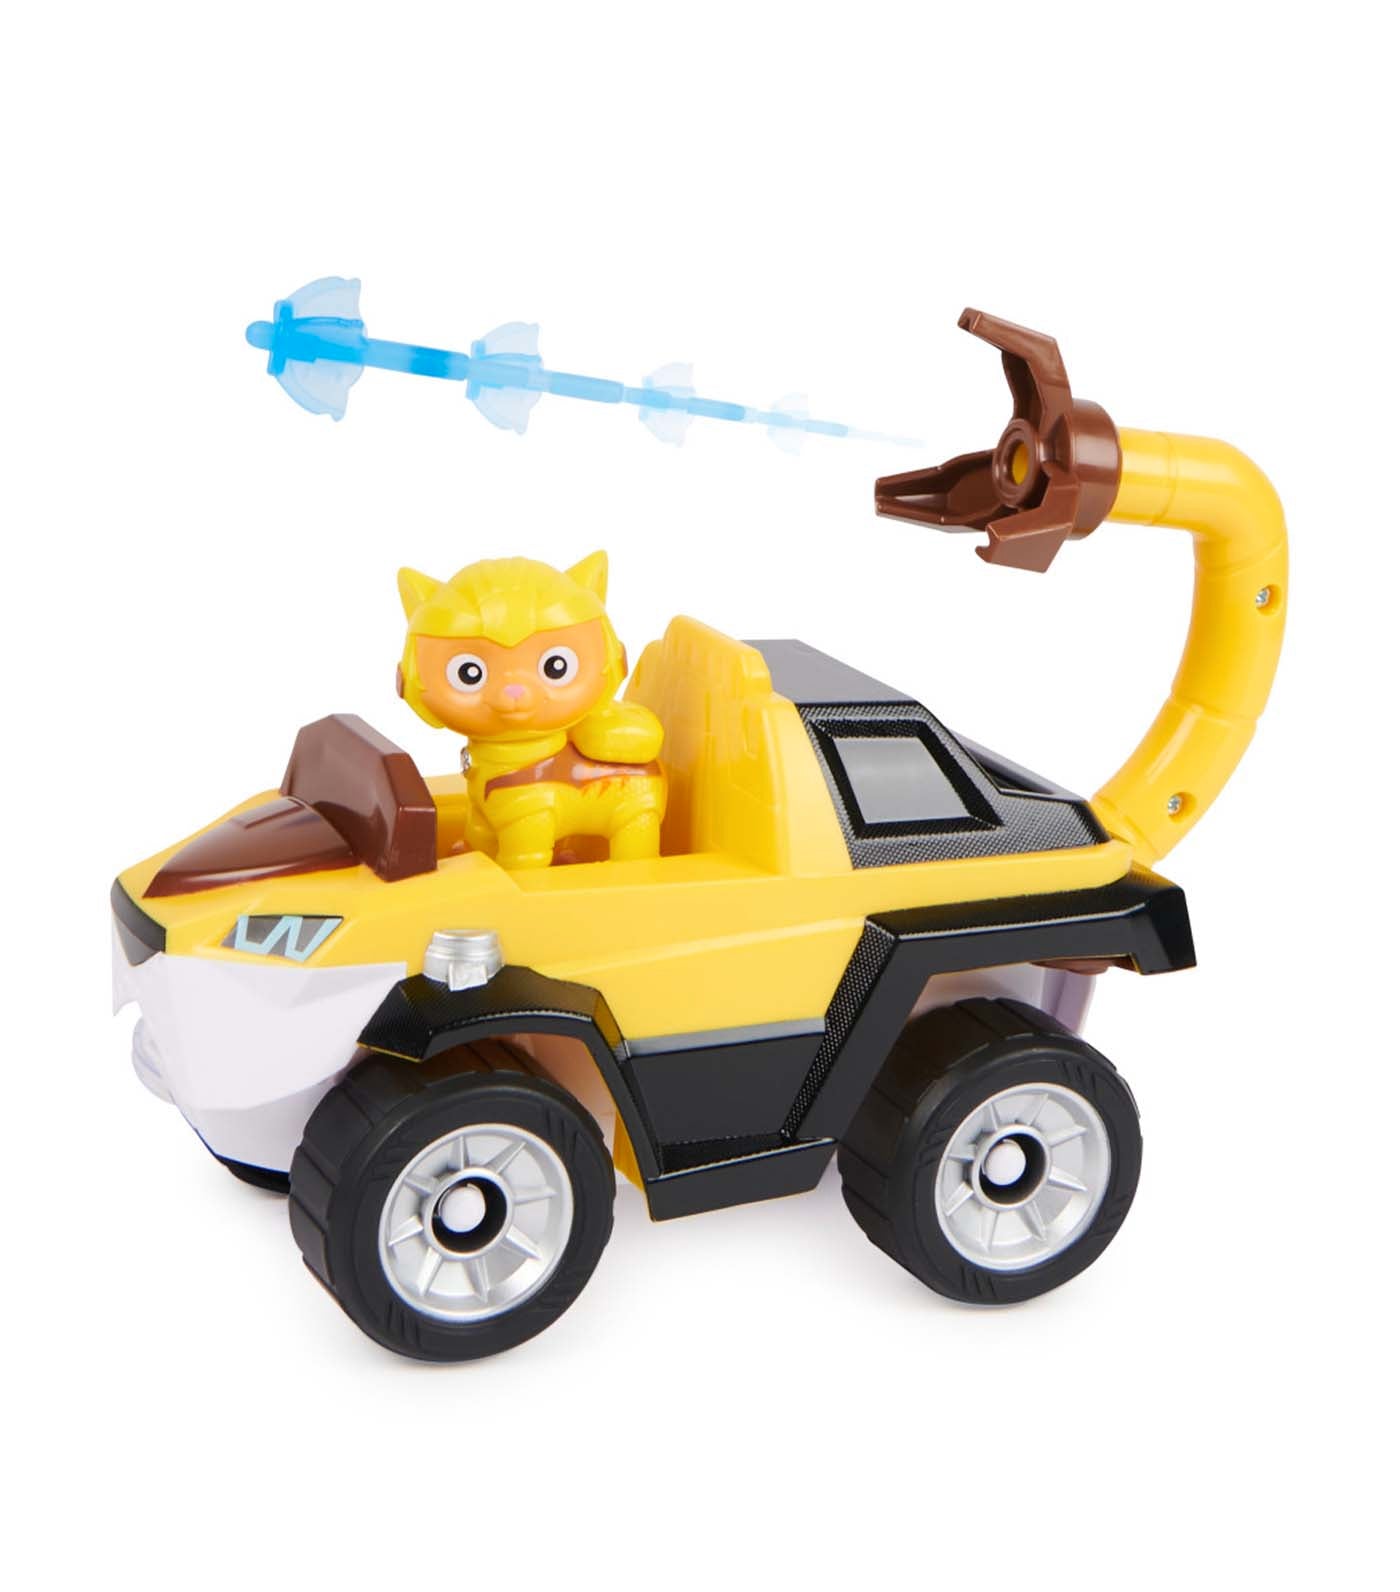 Paw patrol cat pack voiture transformable de rory avec figurine de  collection Spin Master